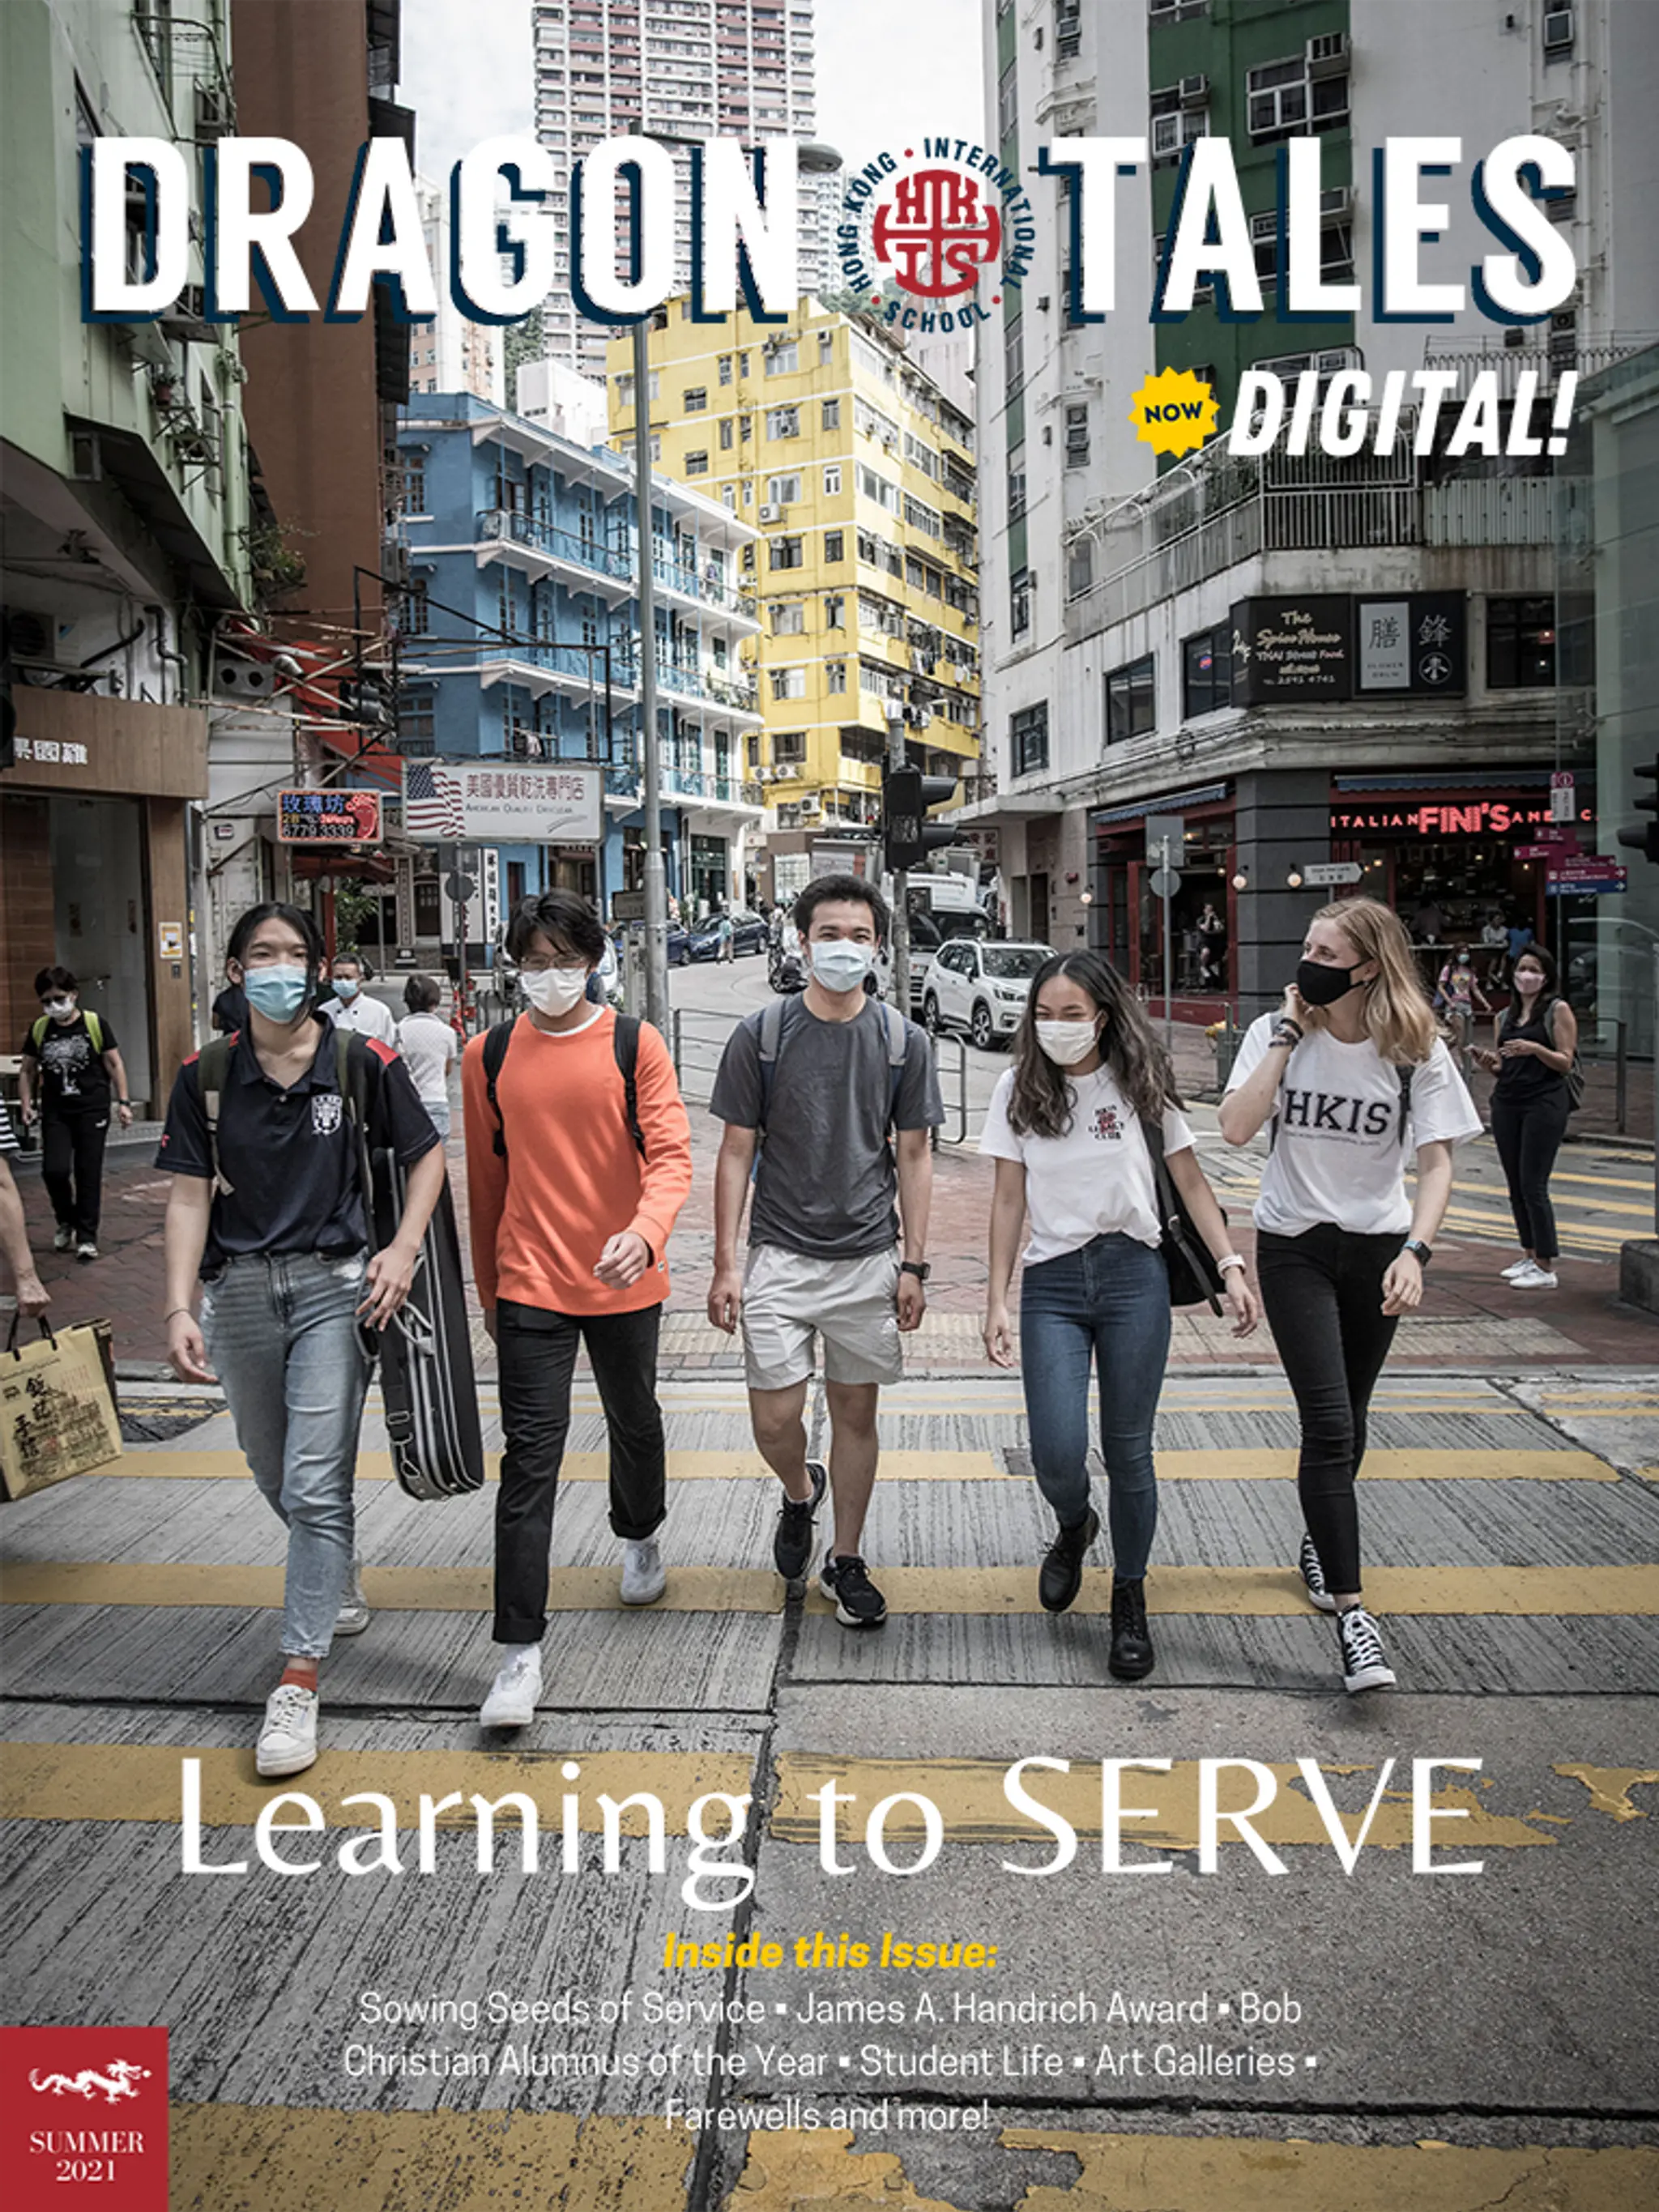 DragonTales: Learning to Serve